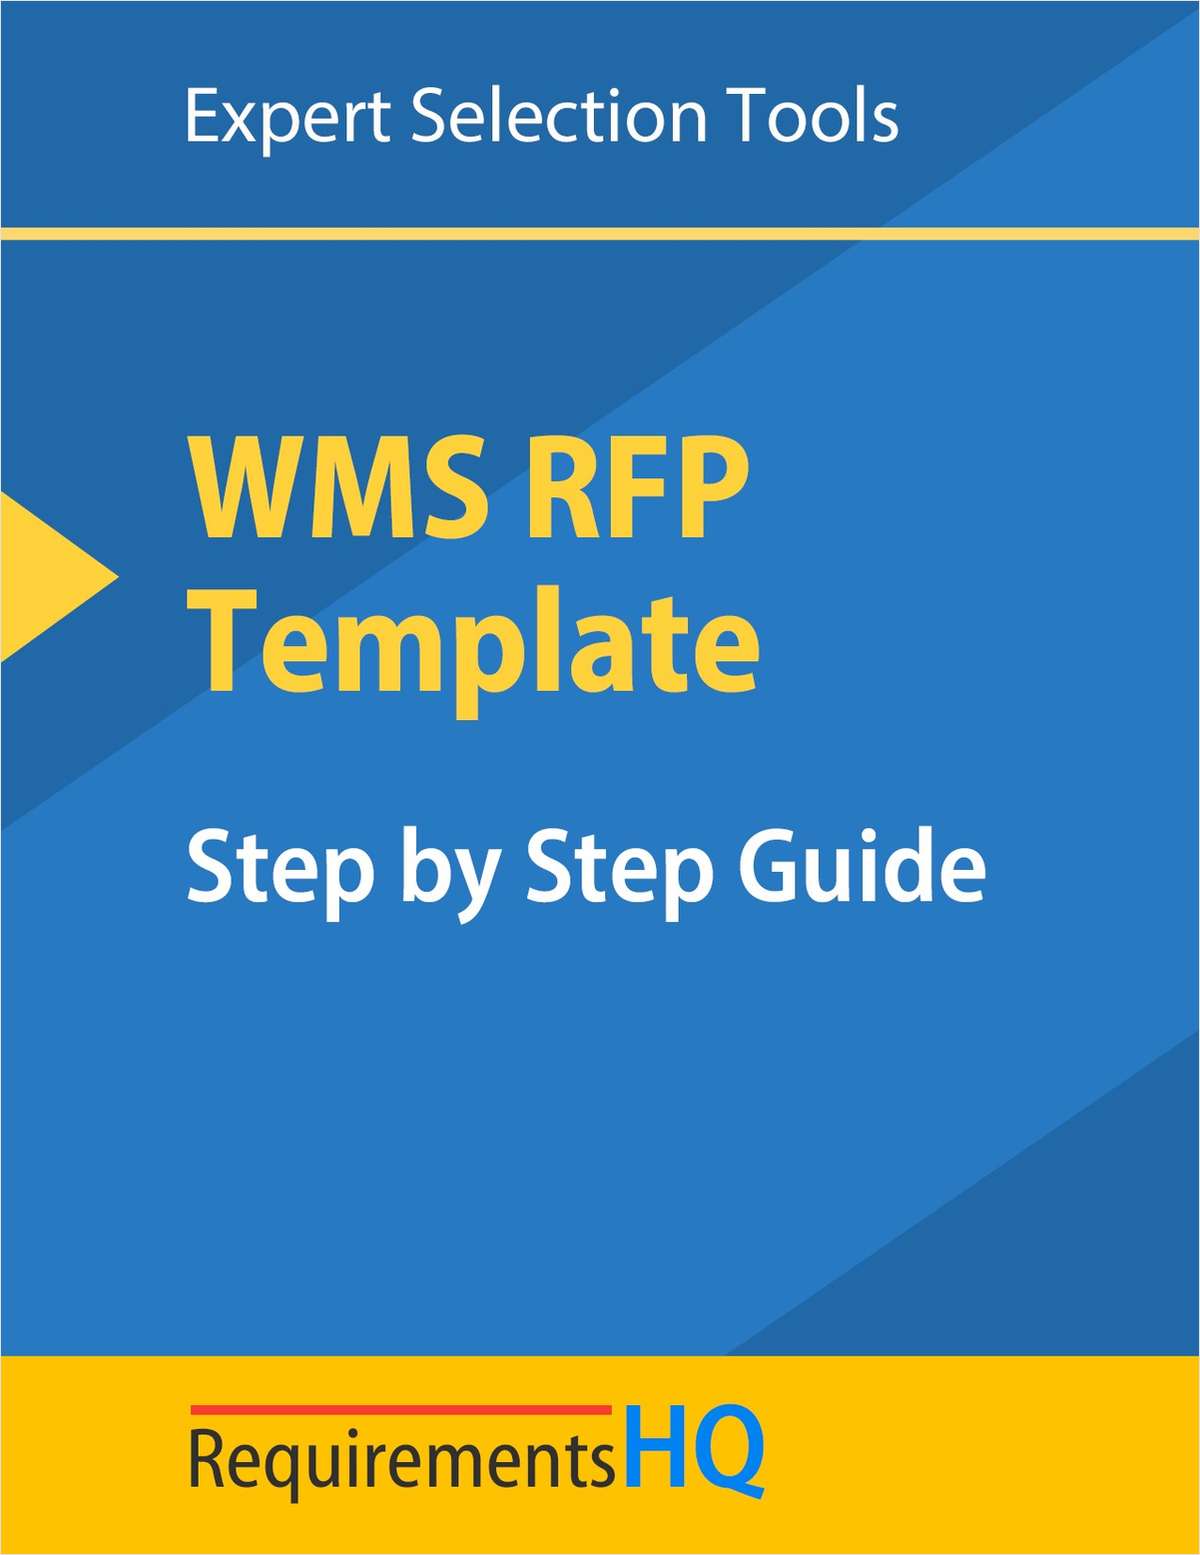 Warehouse Management System RFP Template and Step by Step Guide